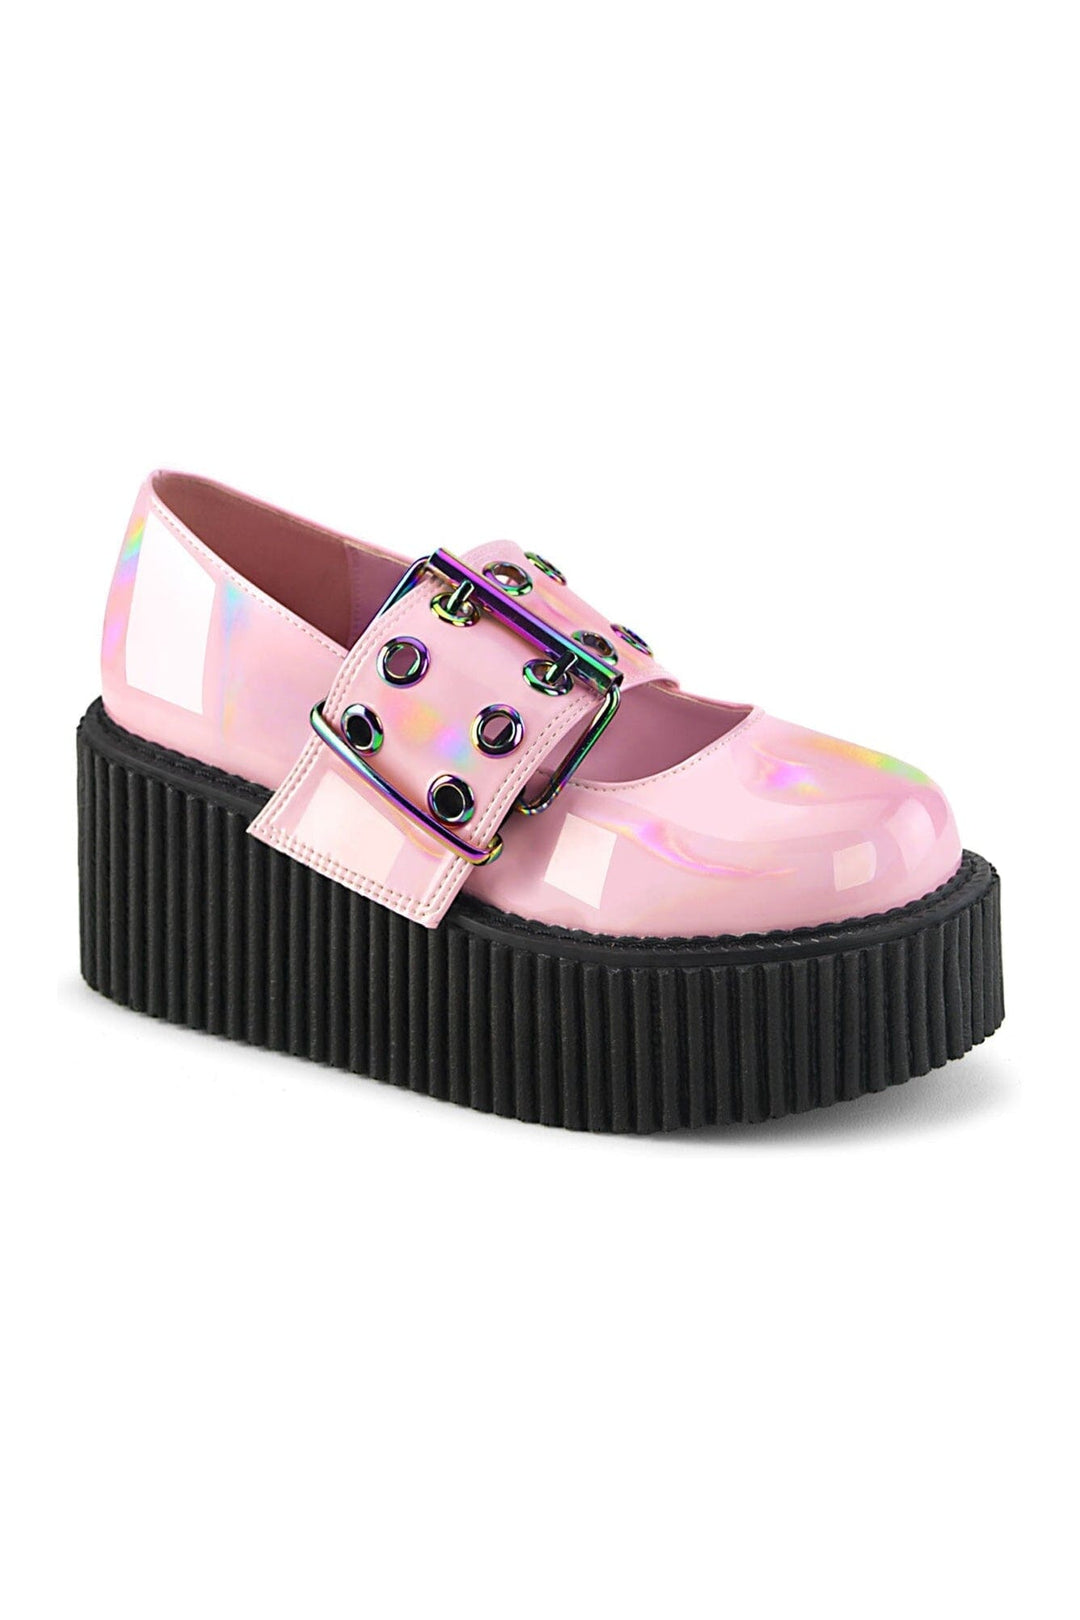 CREEPER-230 Pink Hologram Patent Creeper-Creepers-Demonia-Pink-10-Hologram Patent-SEXYSHOES.COM